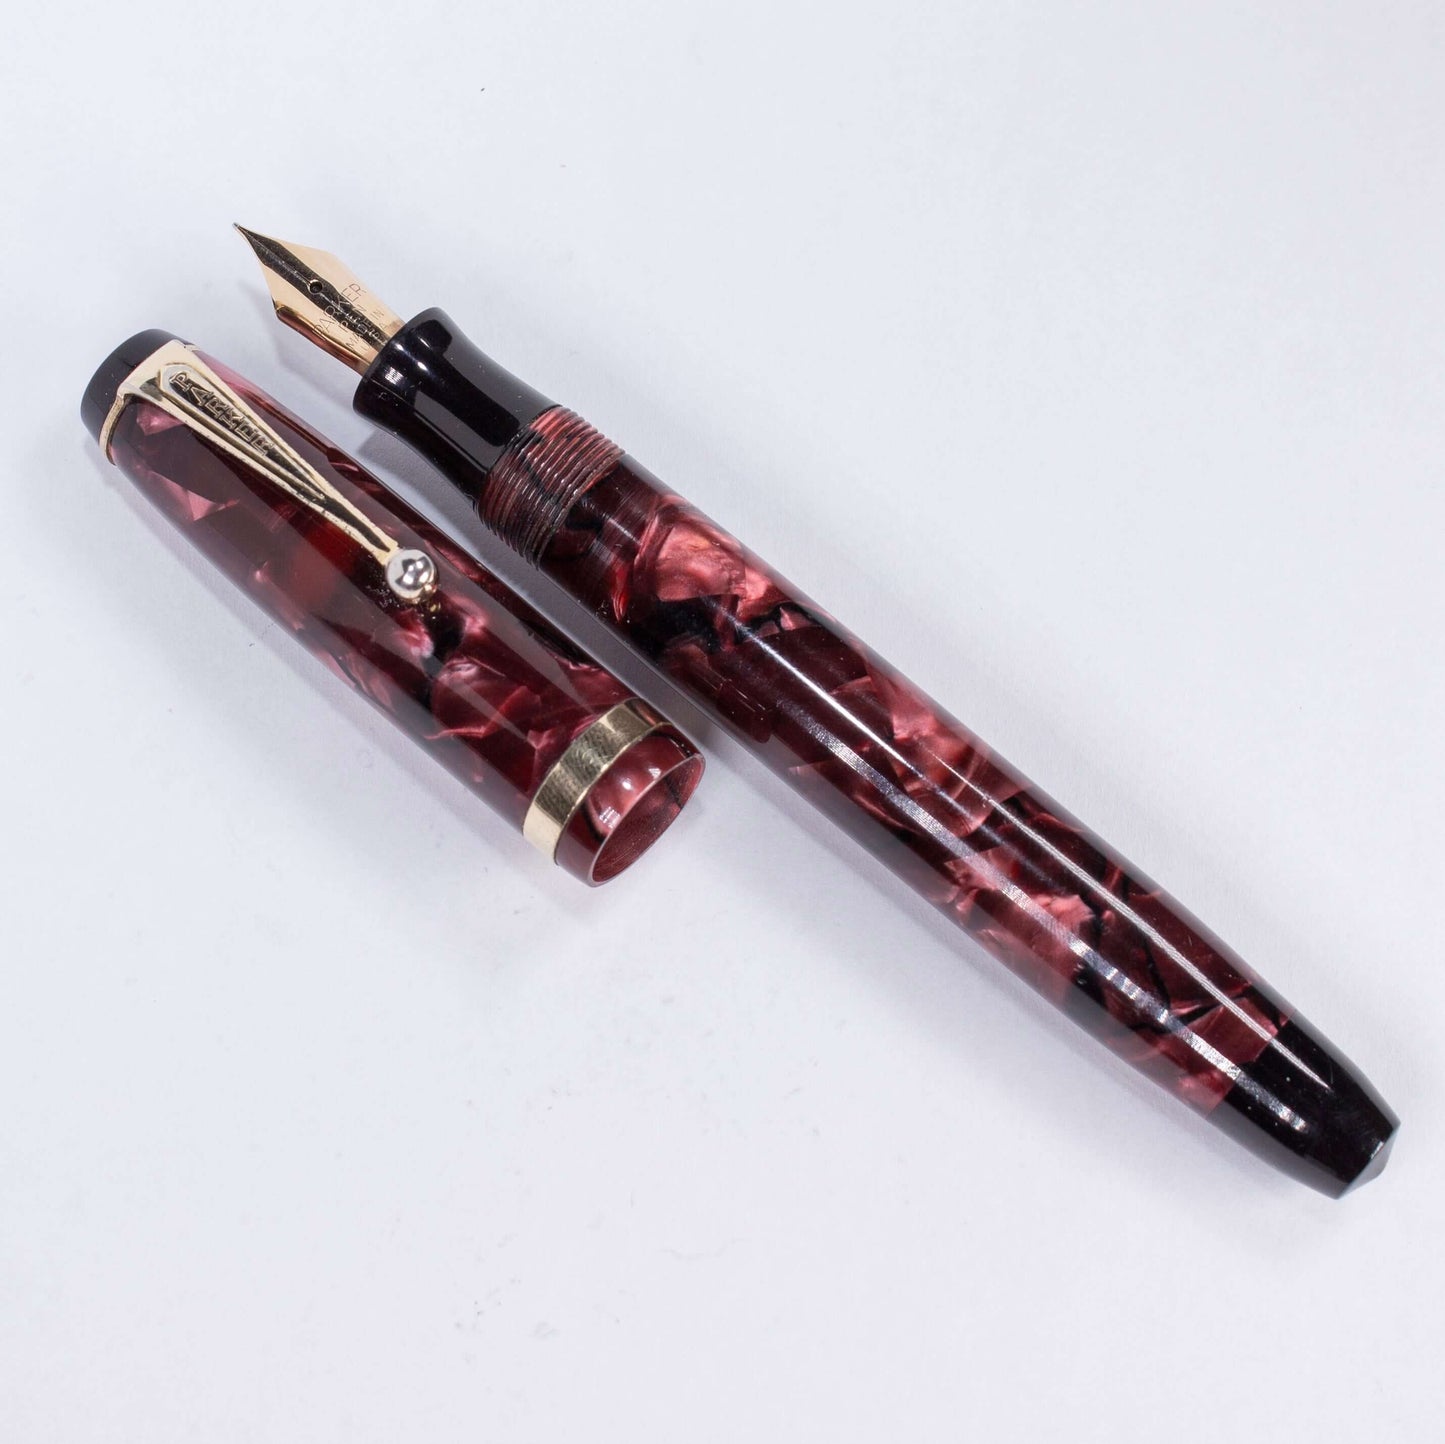 Parker Challenger Fountain Pen, Red Marbled, Button Filler, 14K Gold Nib Name/Type: Parker Challenger Restored Vintage Fountain Pen Manufacture Year: 1930s Length: 5 Filling System: Button Filler Color/Pattern: Red Marbled, Gold filled trim and cap band N